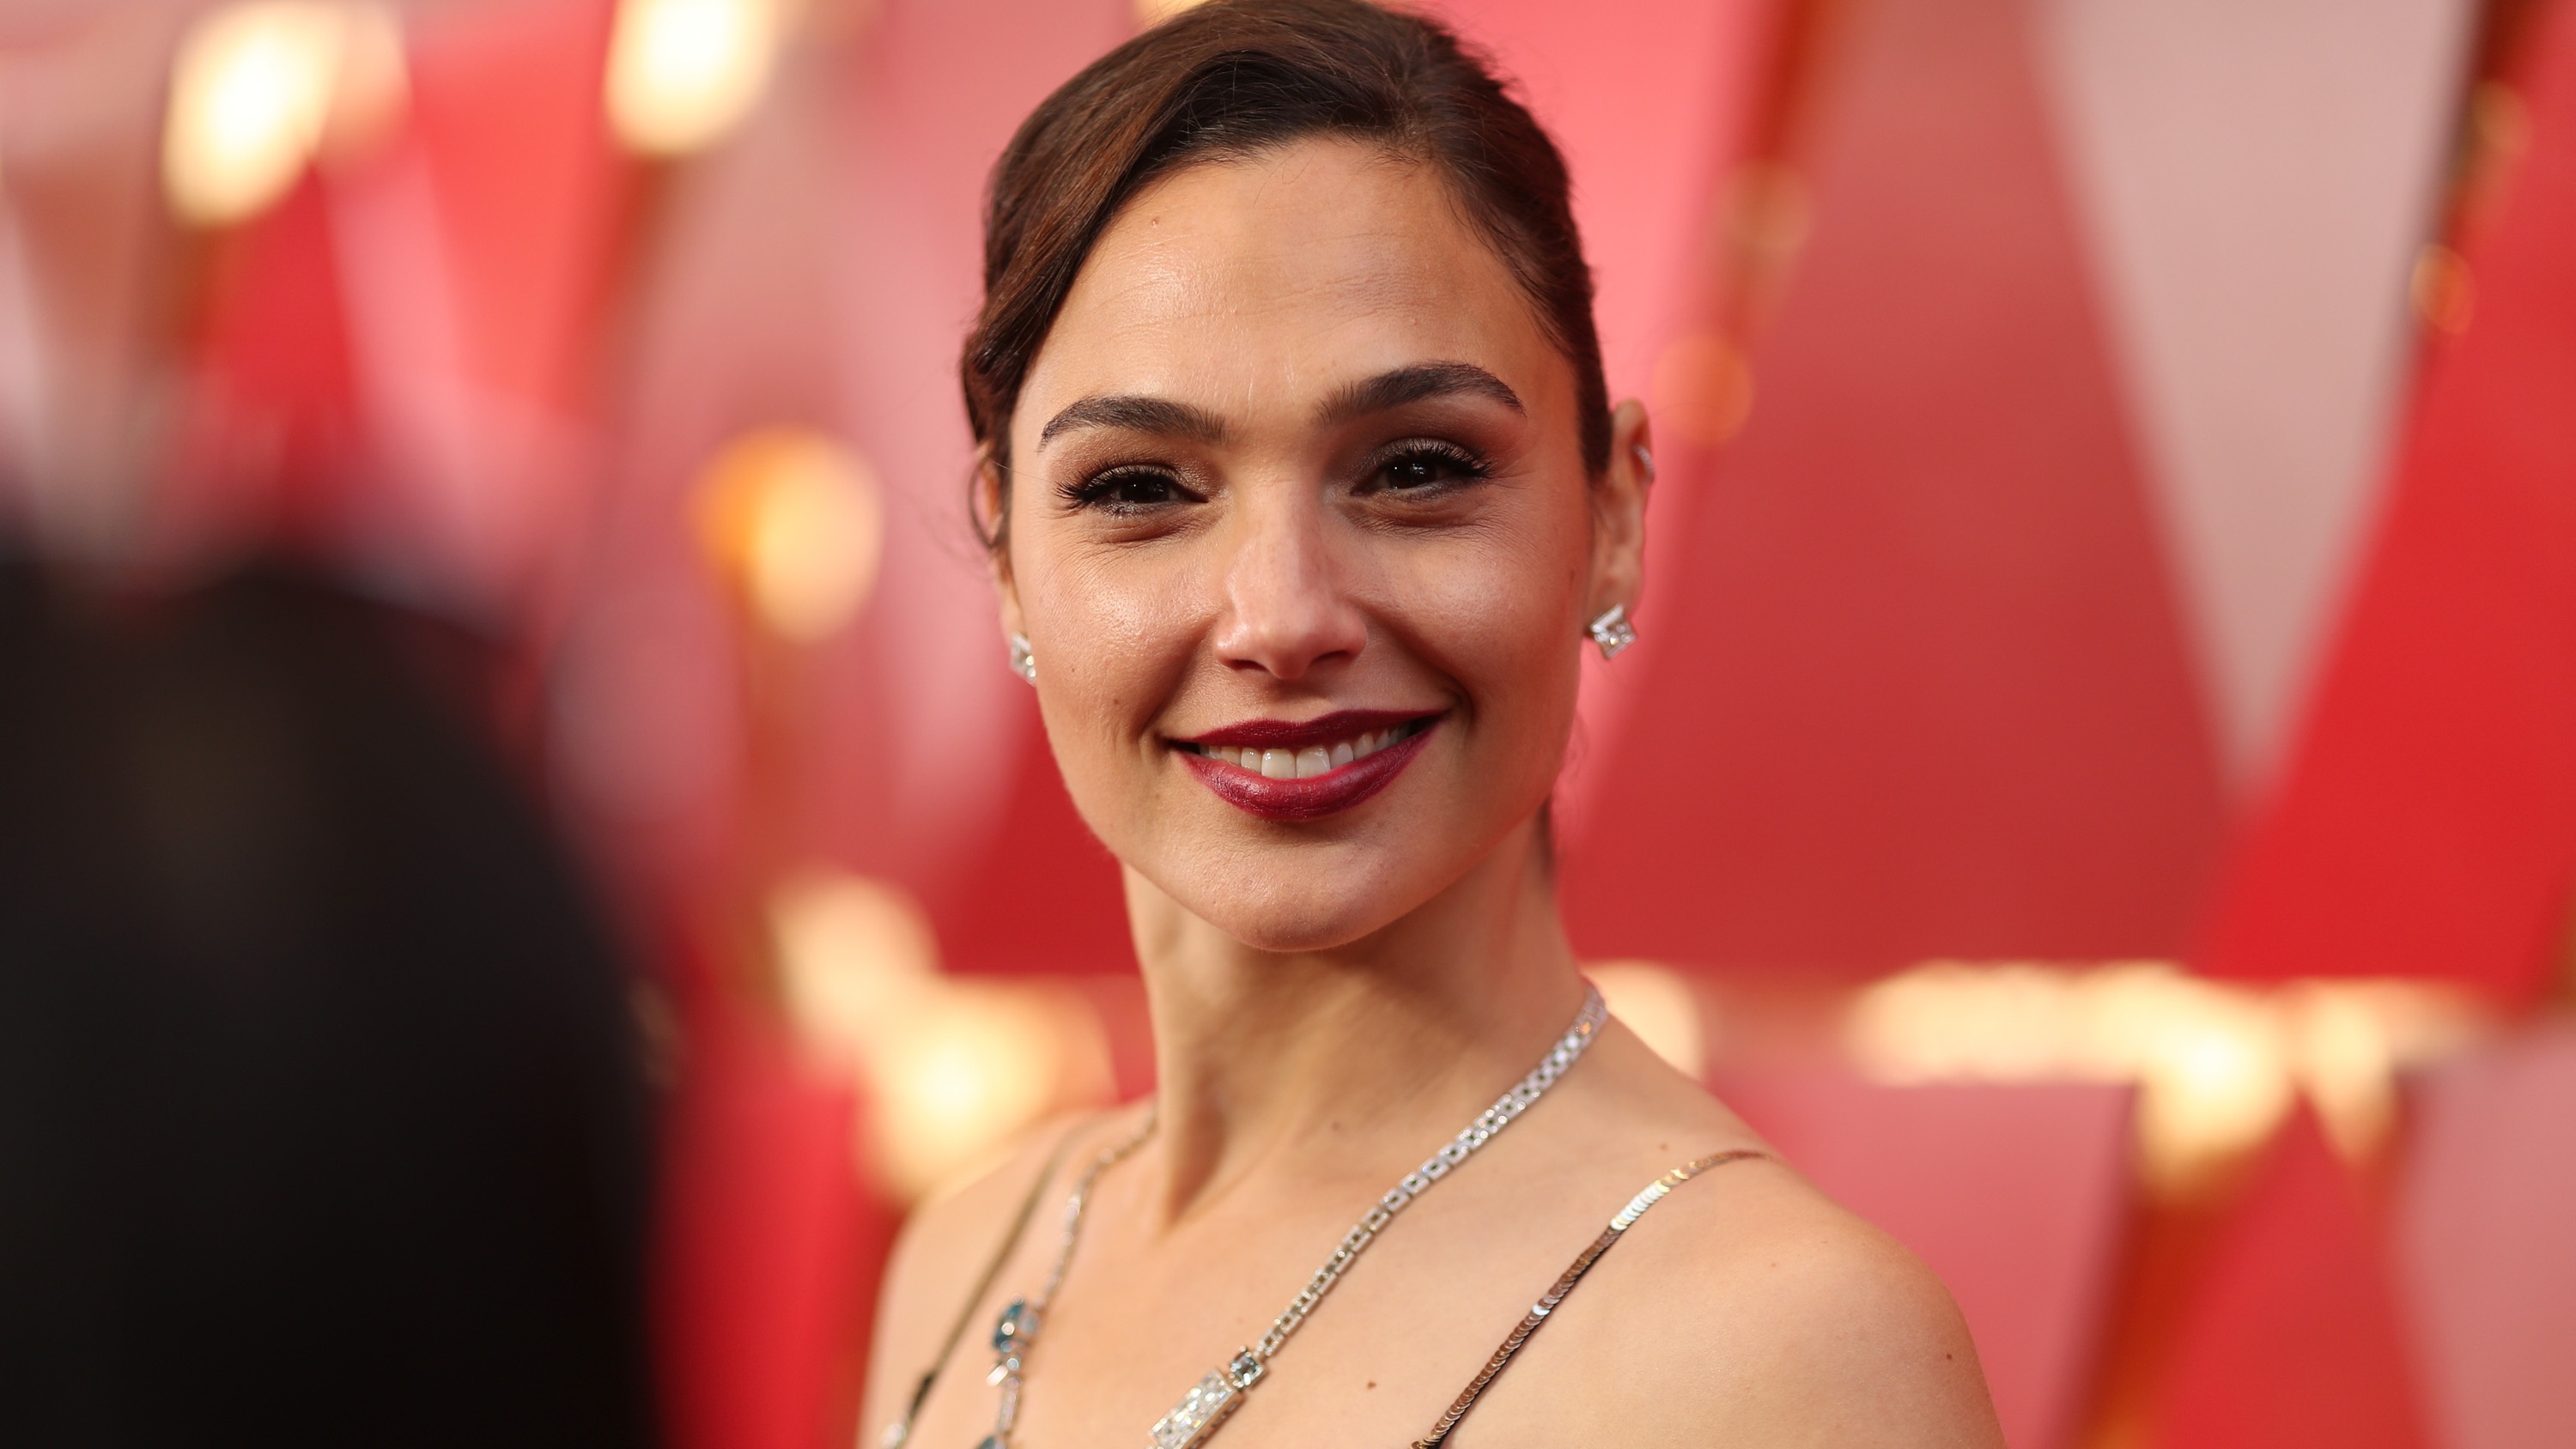 Watch A Bts Gag Reel Of Gal Gadot In Wonder Woman 1984 Grazia Wonder woman star gal gadot was a very reluctant pageant queen. watch a bts gag reel of gal gadot in